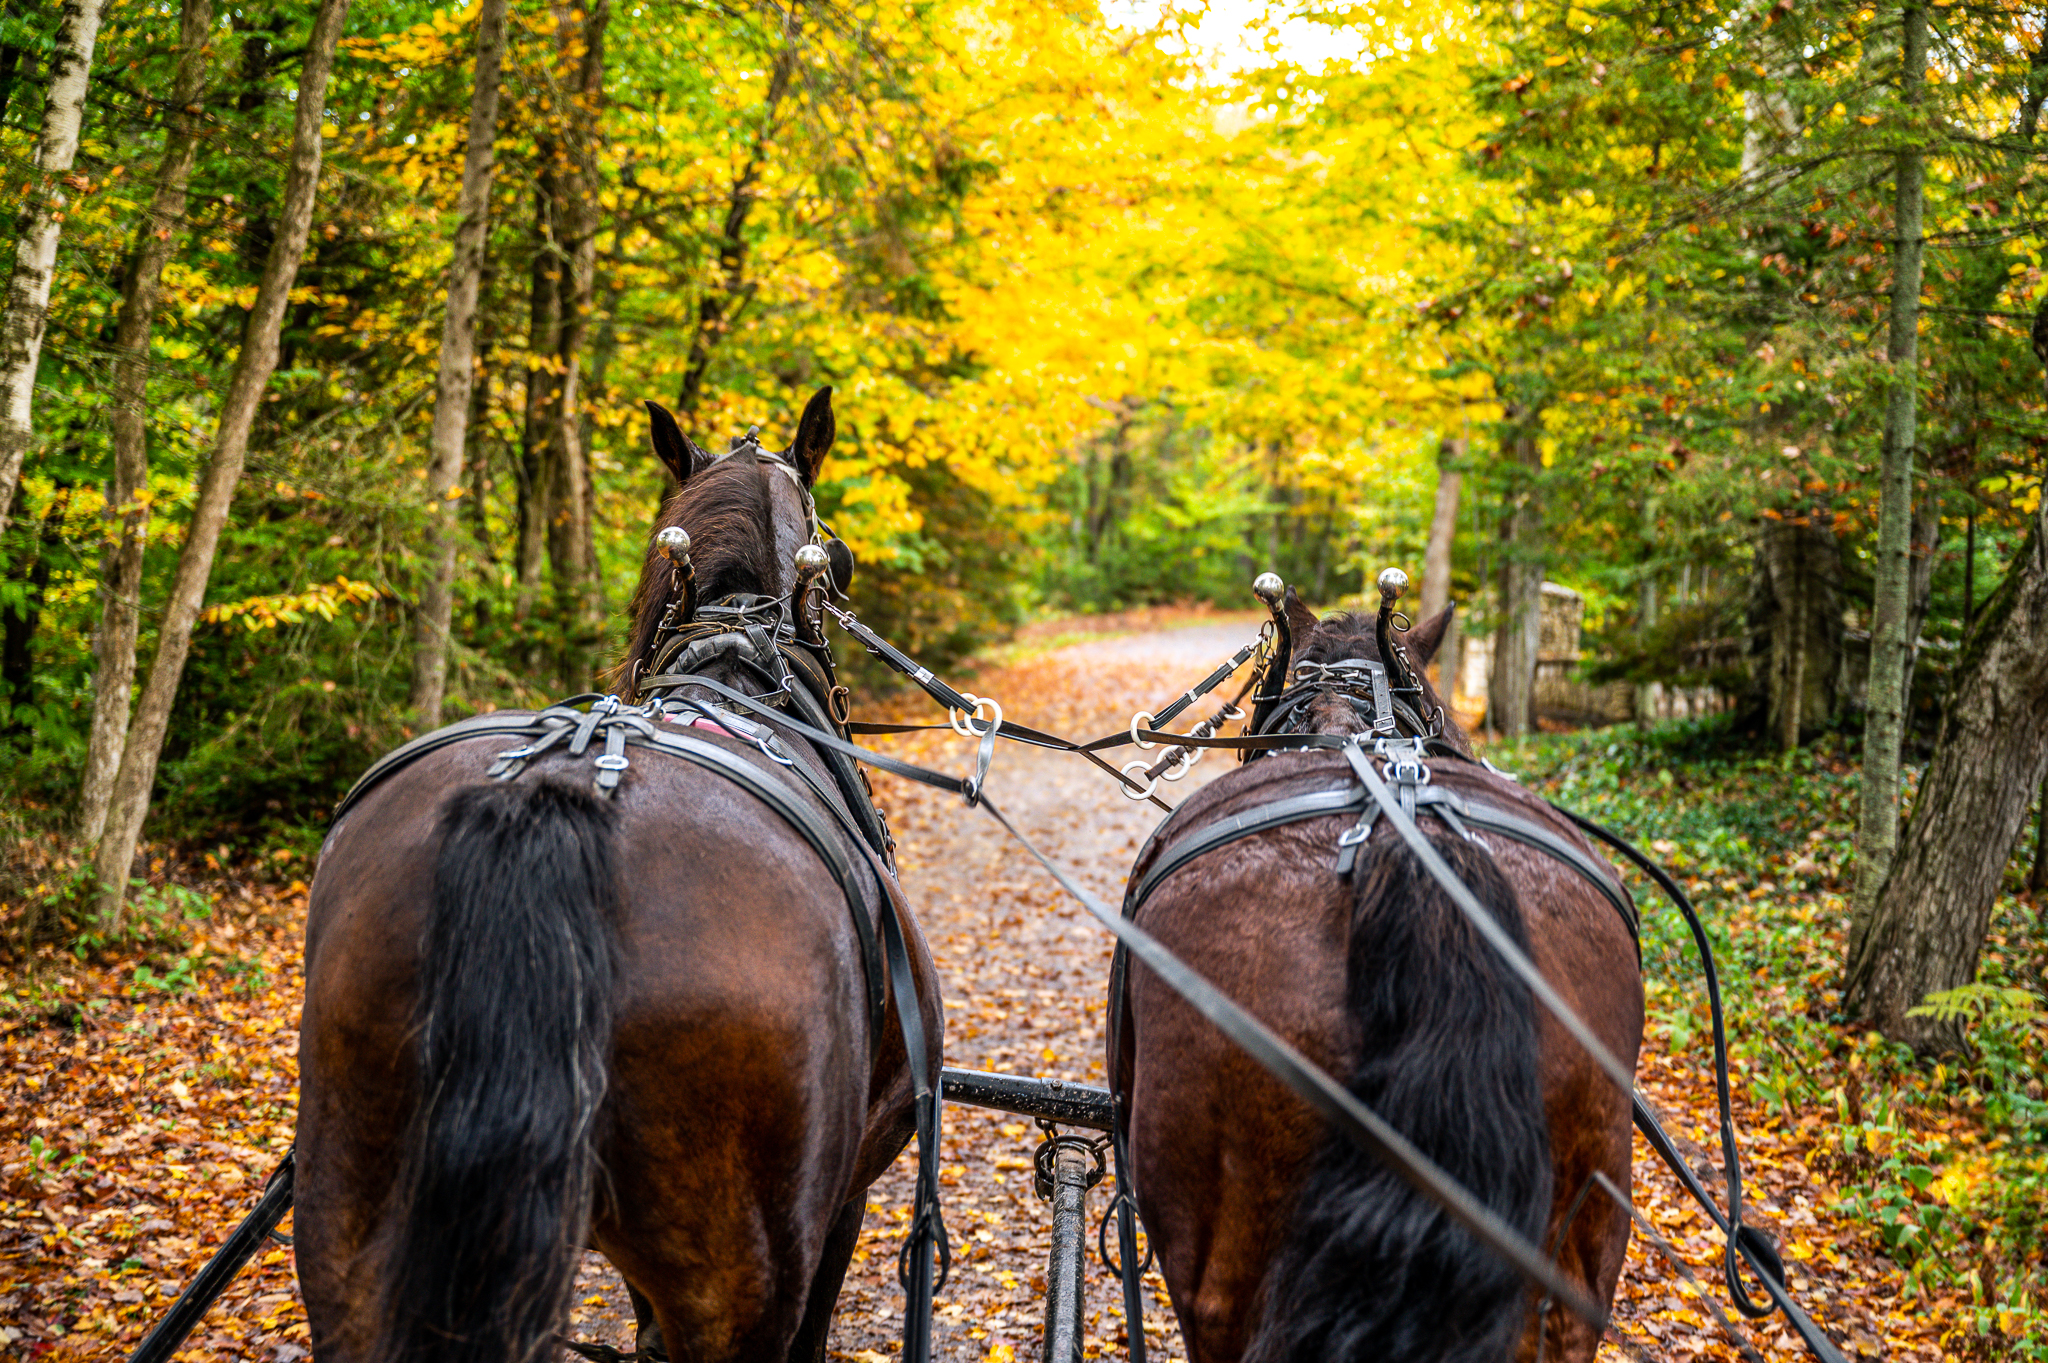 Horse drawn carriage tour on a fall day on mackinac island